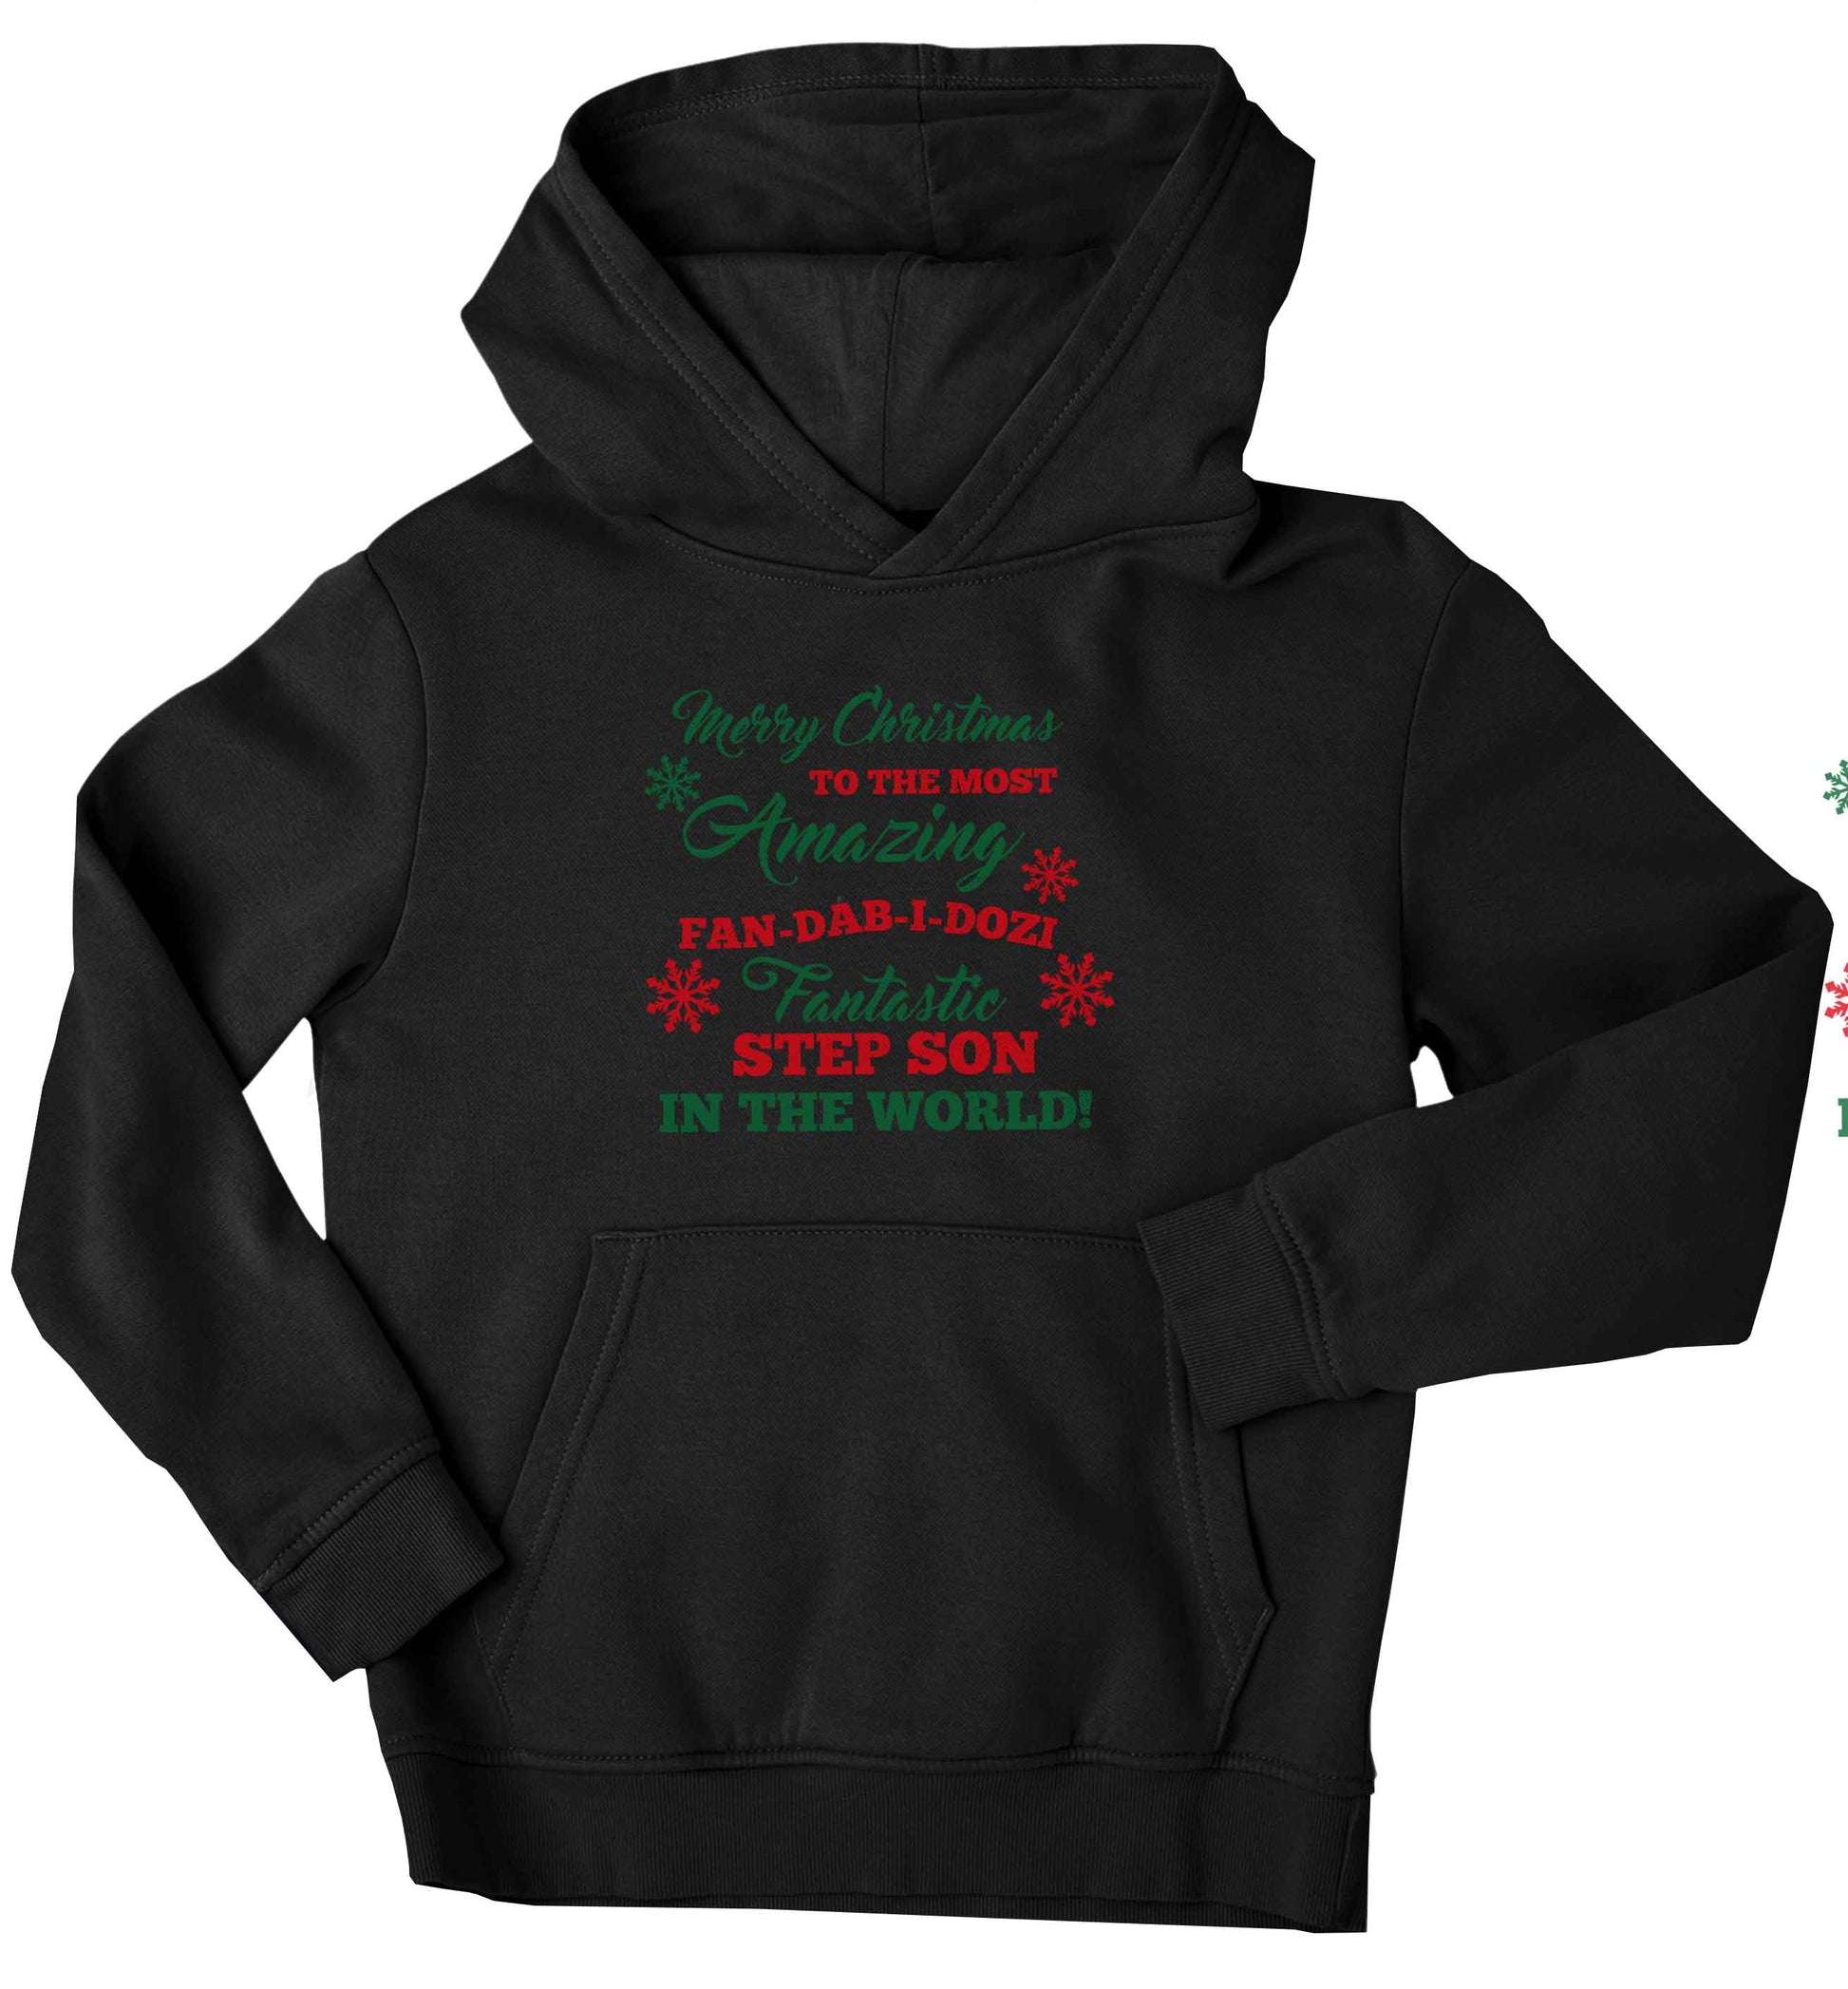 Merry Christmas to the most amazing fan-dab-i-dozi fantasic Step Son in the world children's black hoodie 12-13 Years